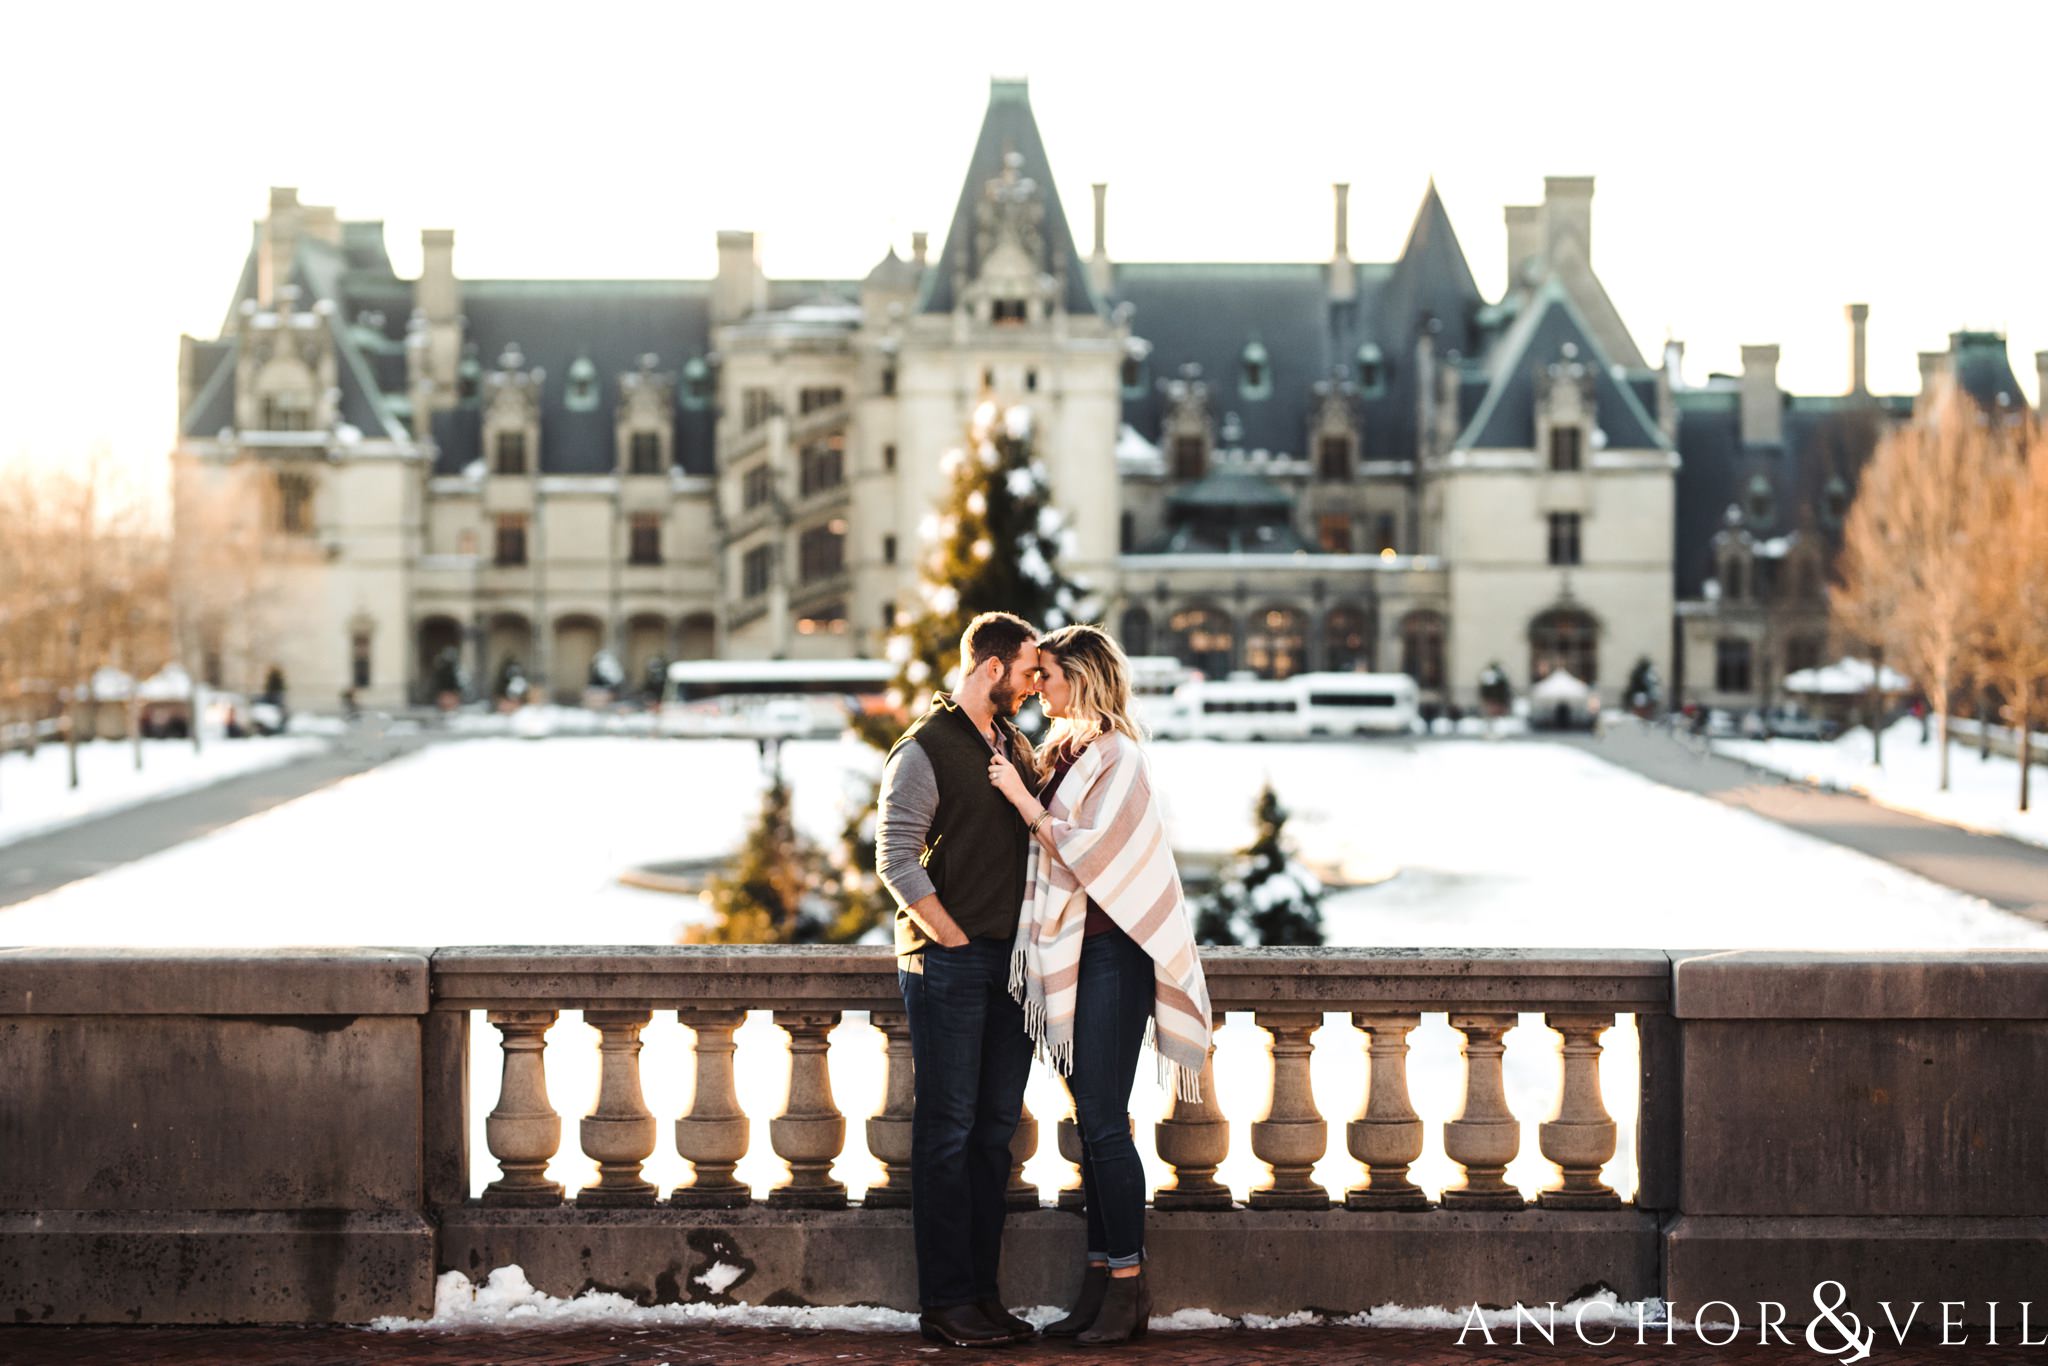 ni front of the house during their Snowy Biltmore Engagement Session